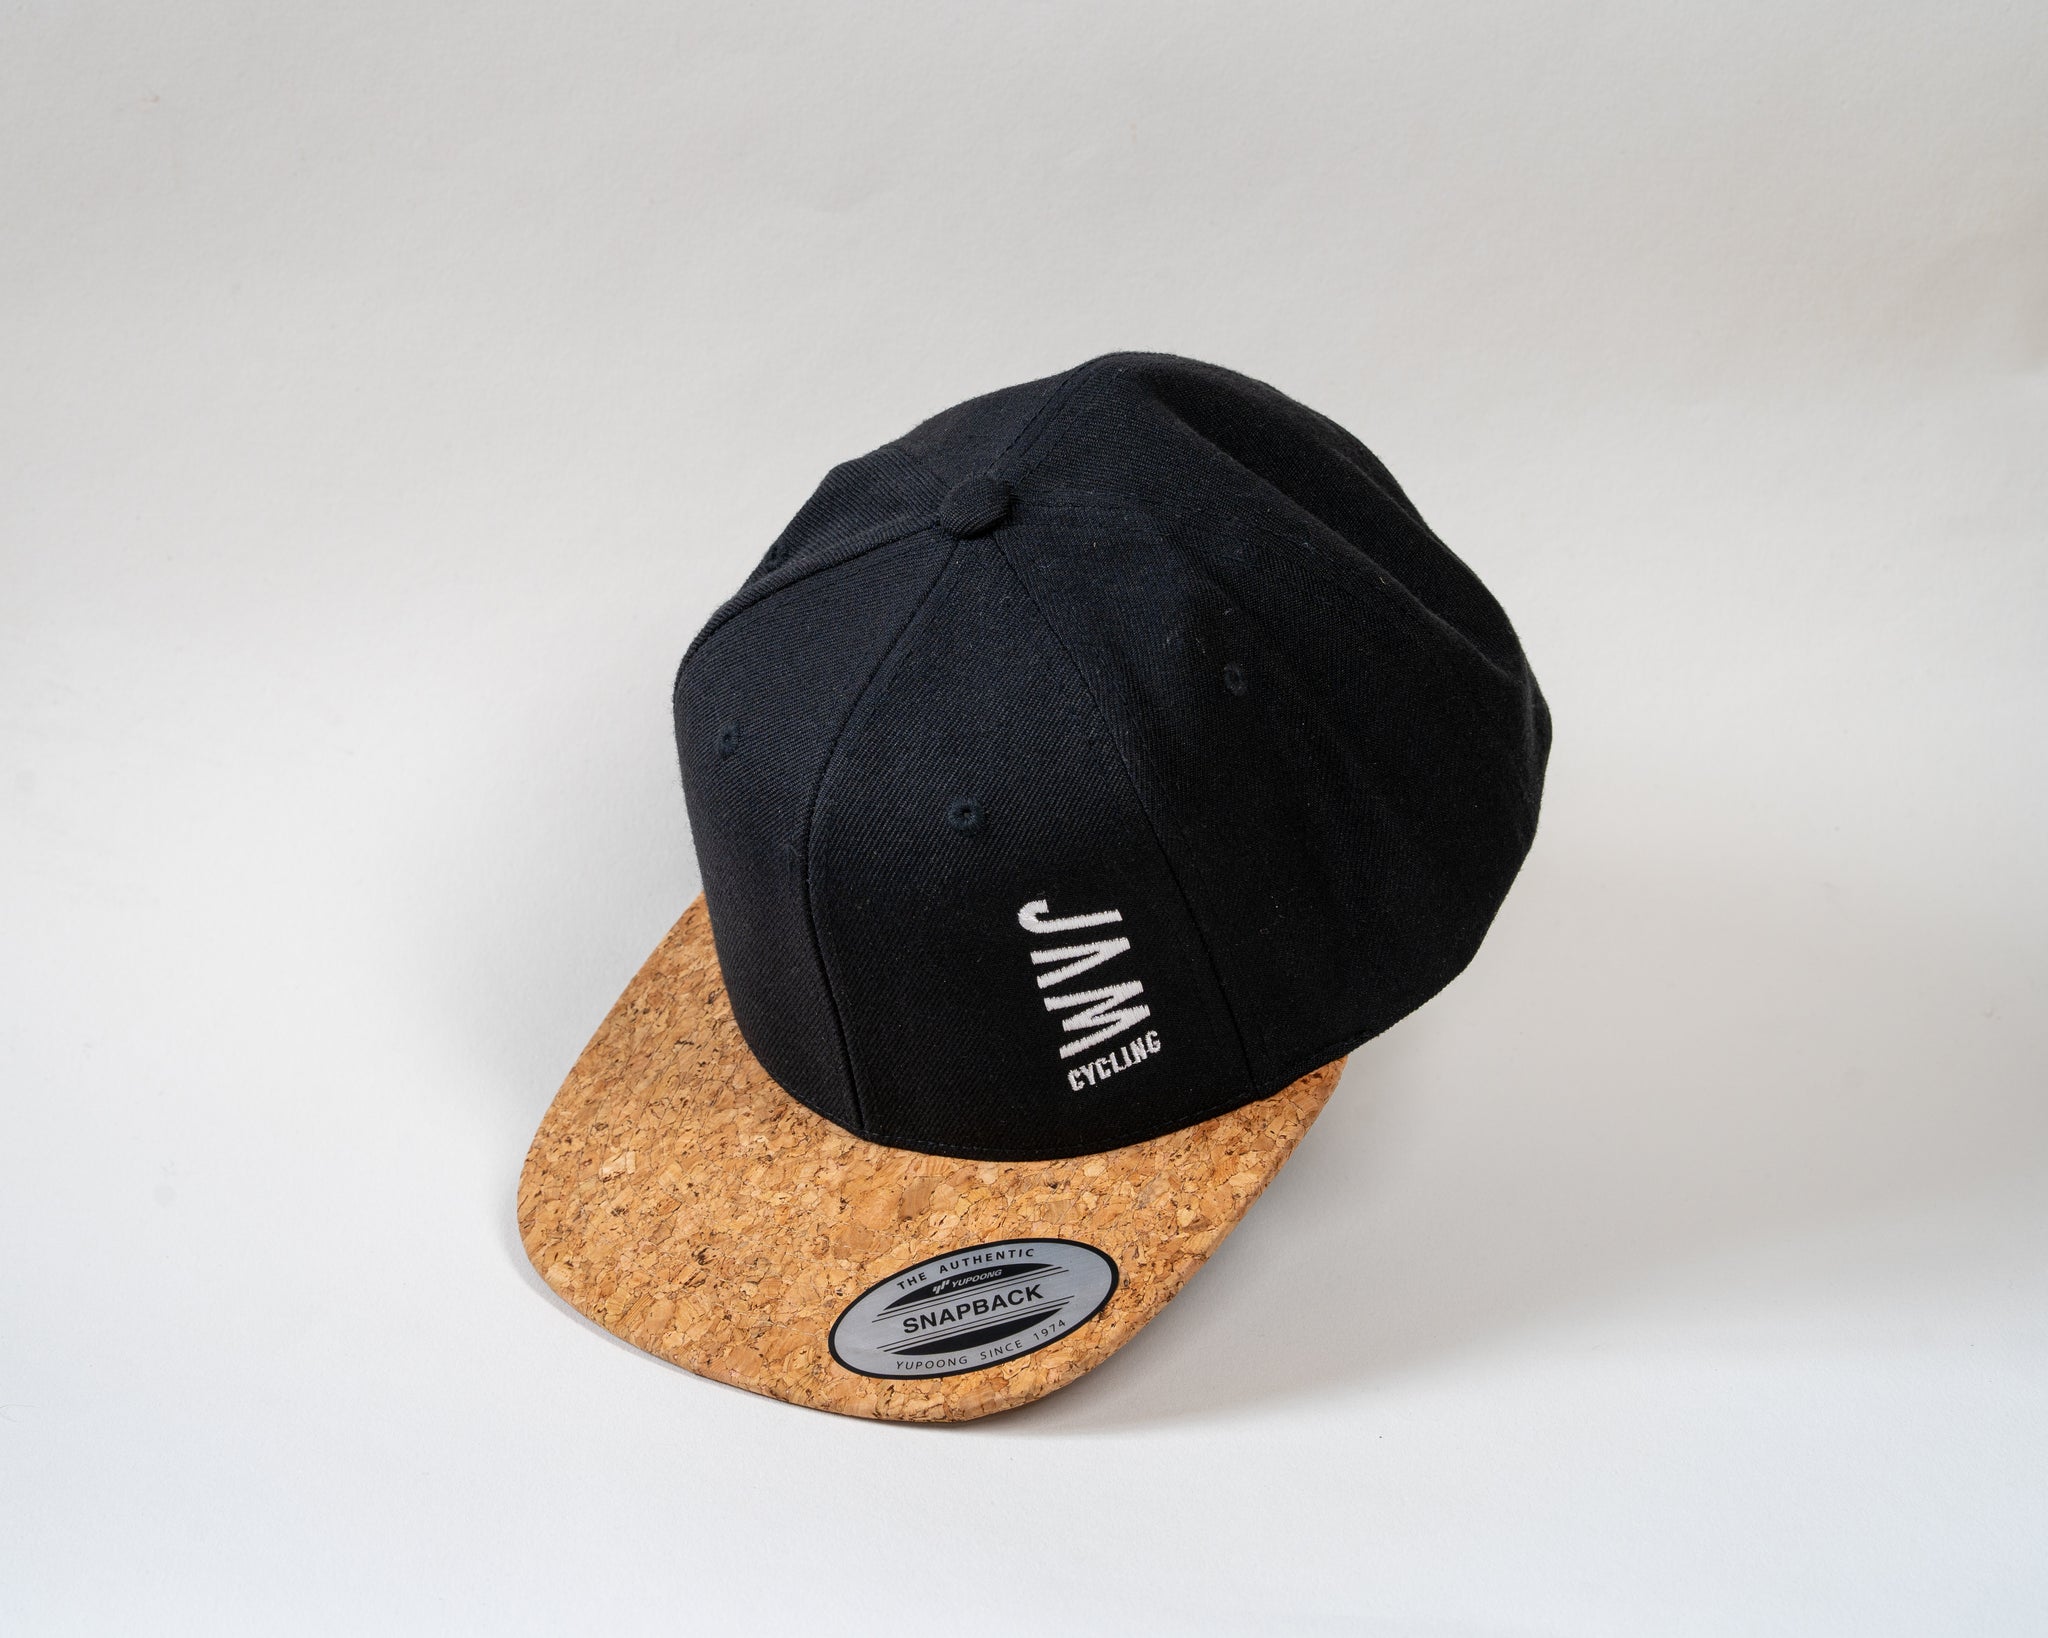 JAM snap back cap featuring cork peak stitched JAM logo floating on a white background cool product photography